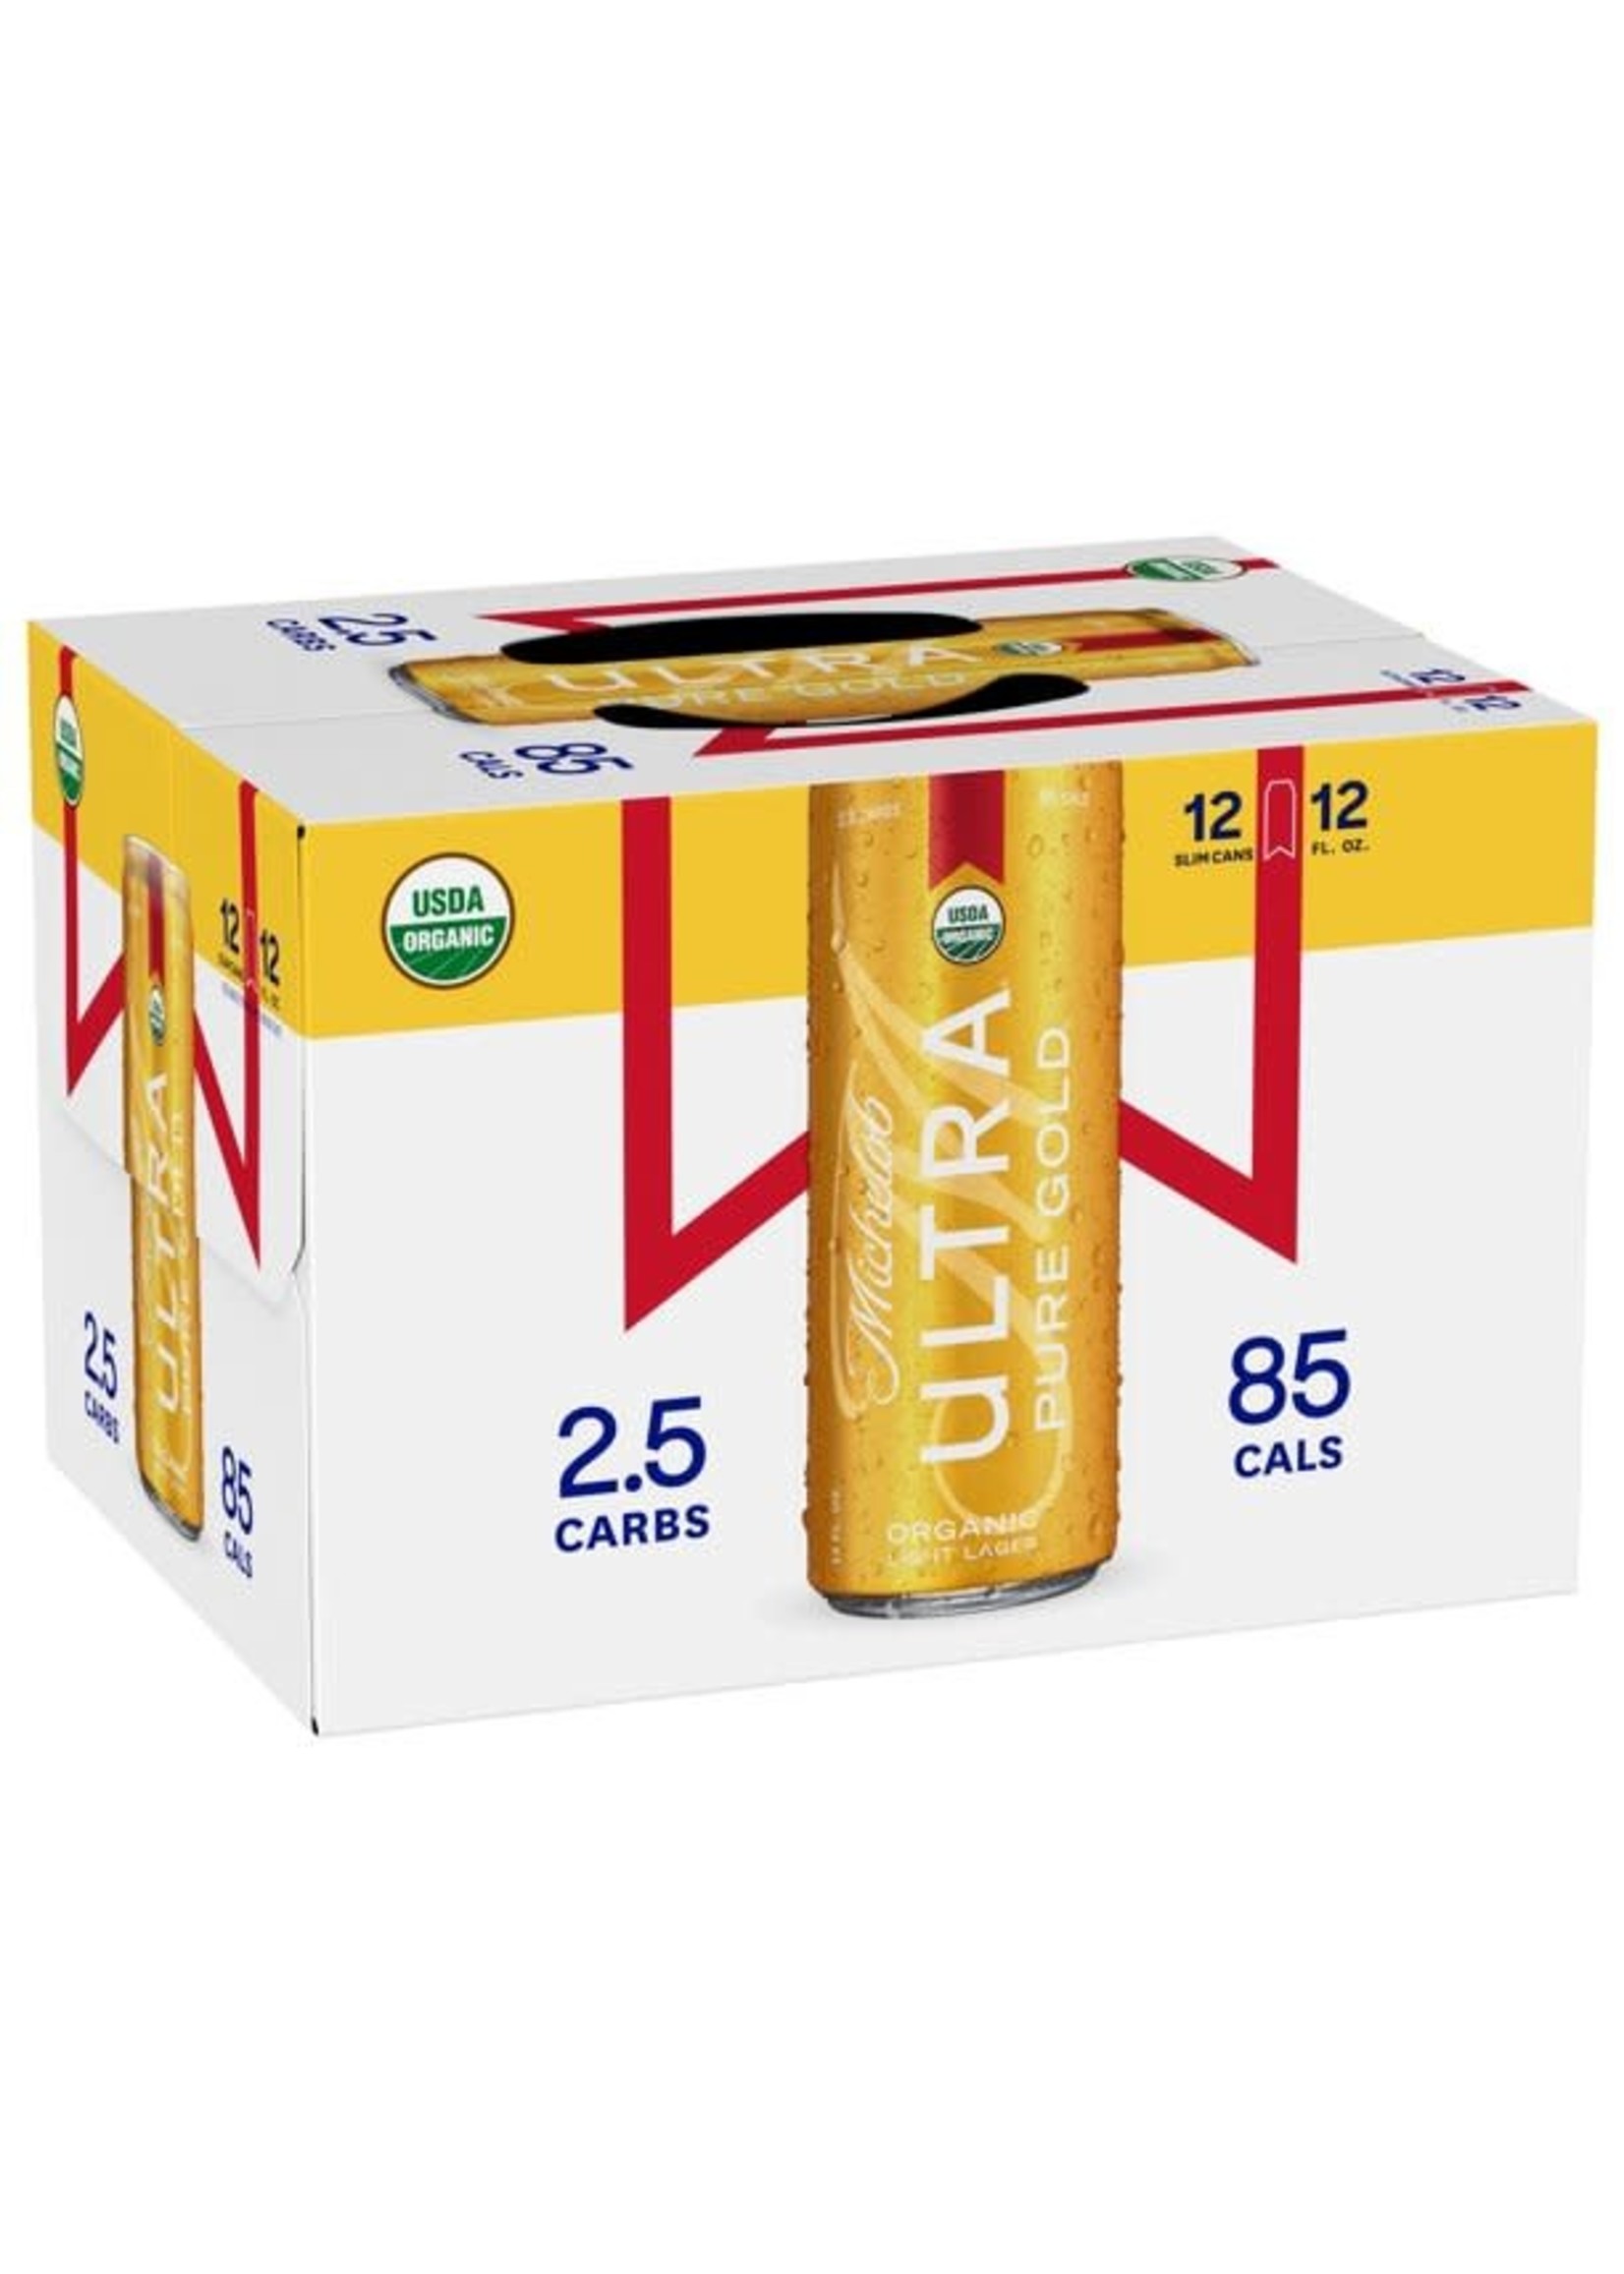 Michelob Ultra Pure Gold 12pk 12oz Cans